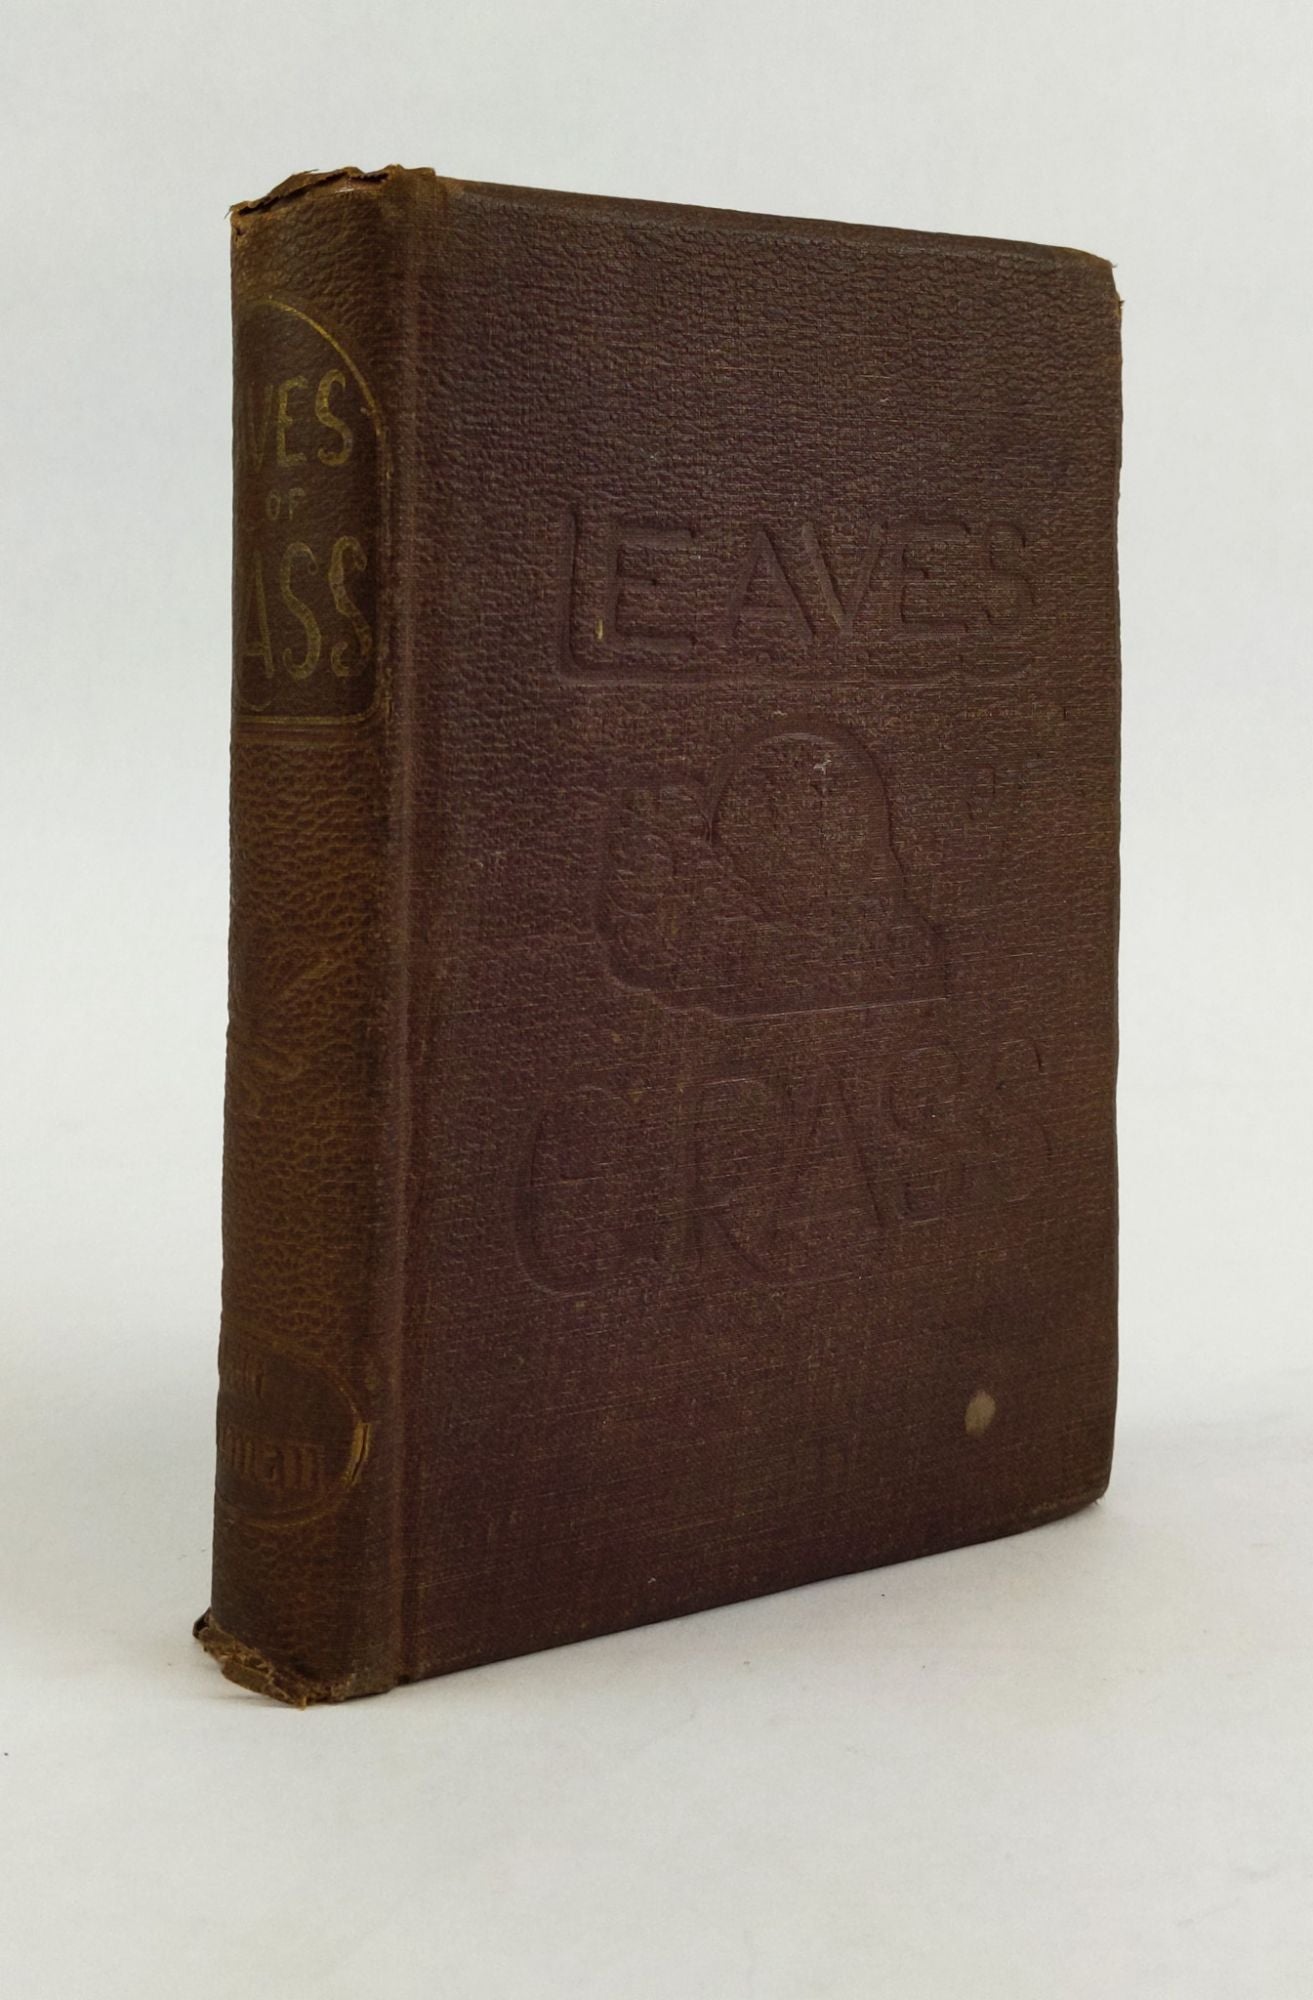 Product Image for LEAVES OF GRASS